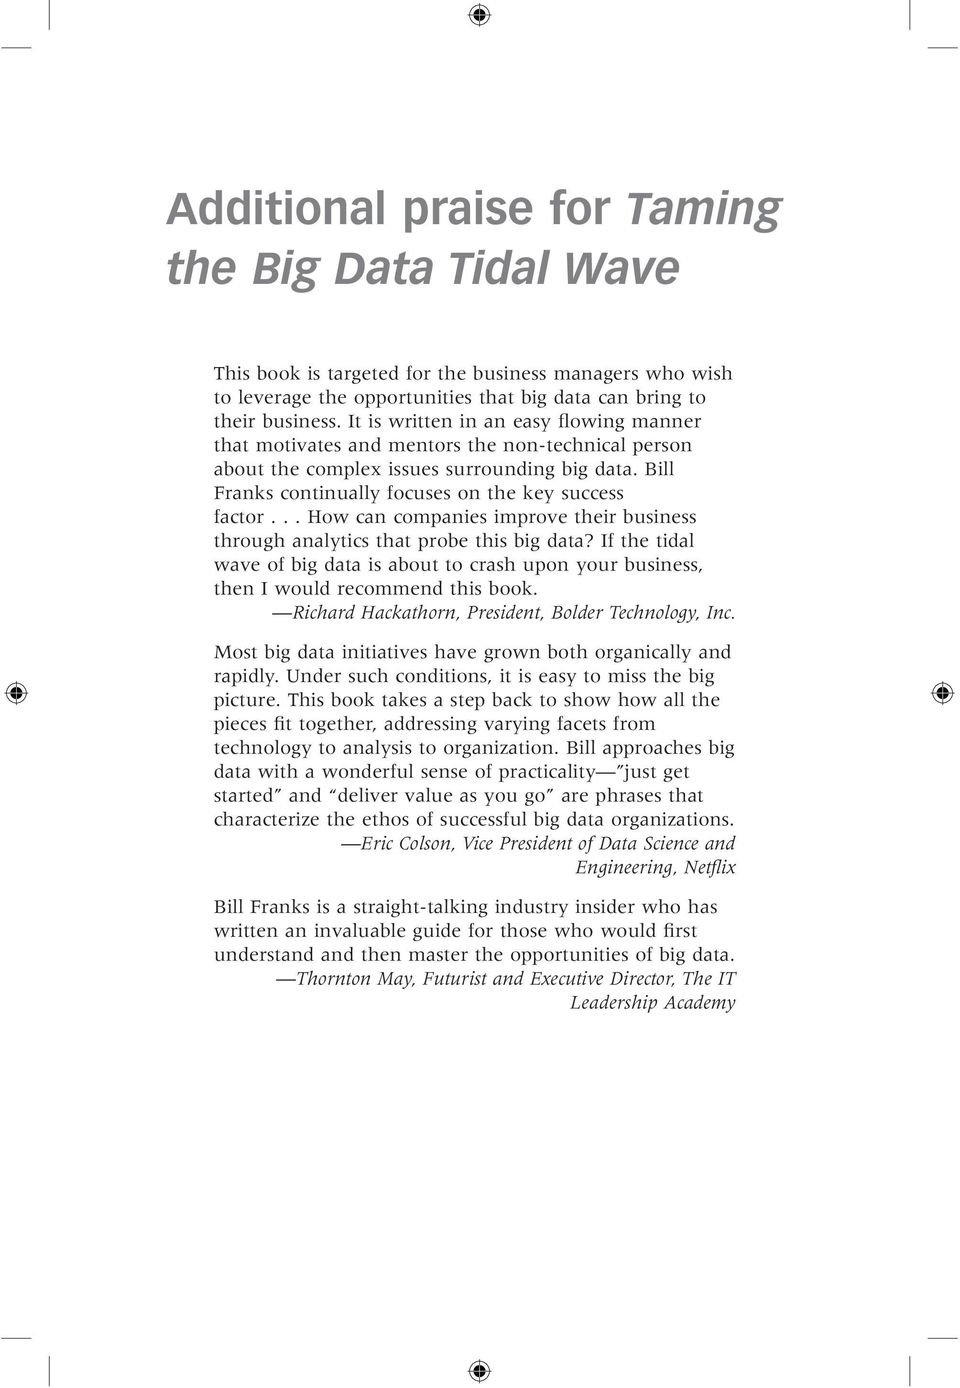 .. How can companies improve their business through analytics that probe this big data? If the tidal wave of big data is about to crash upon your business, then I would recommend this book.